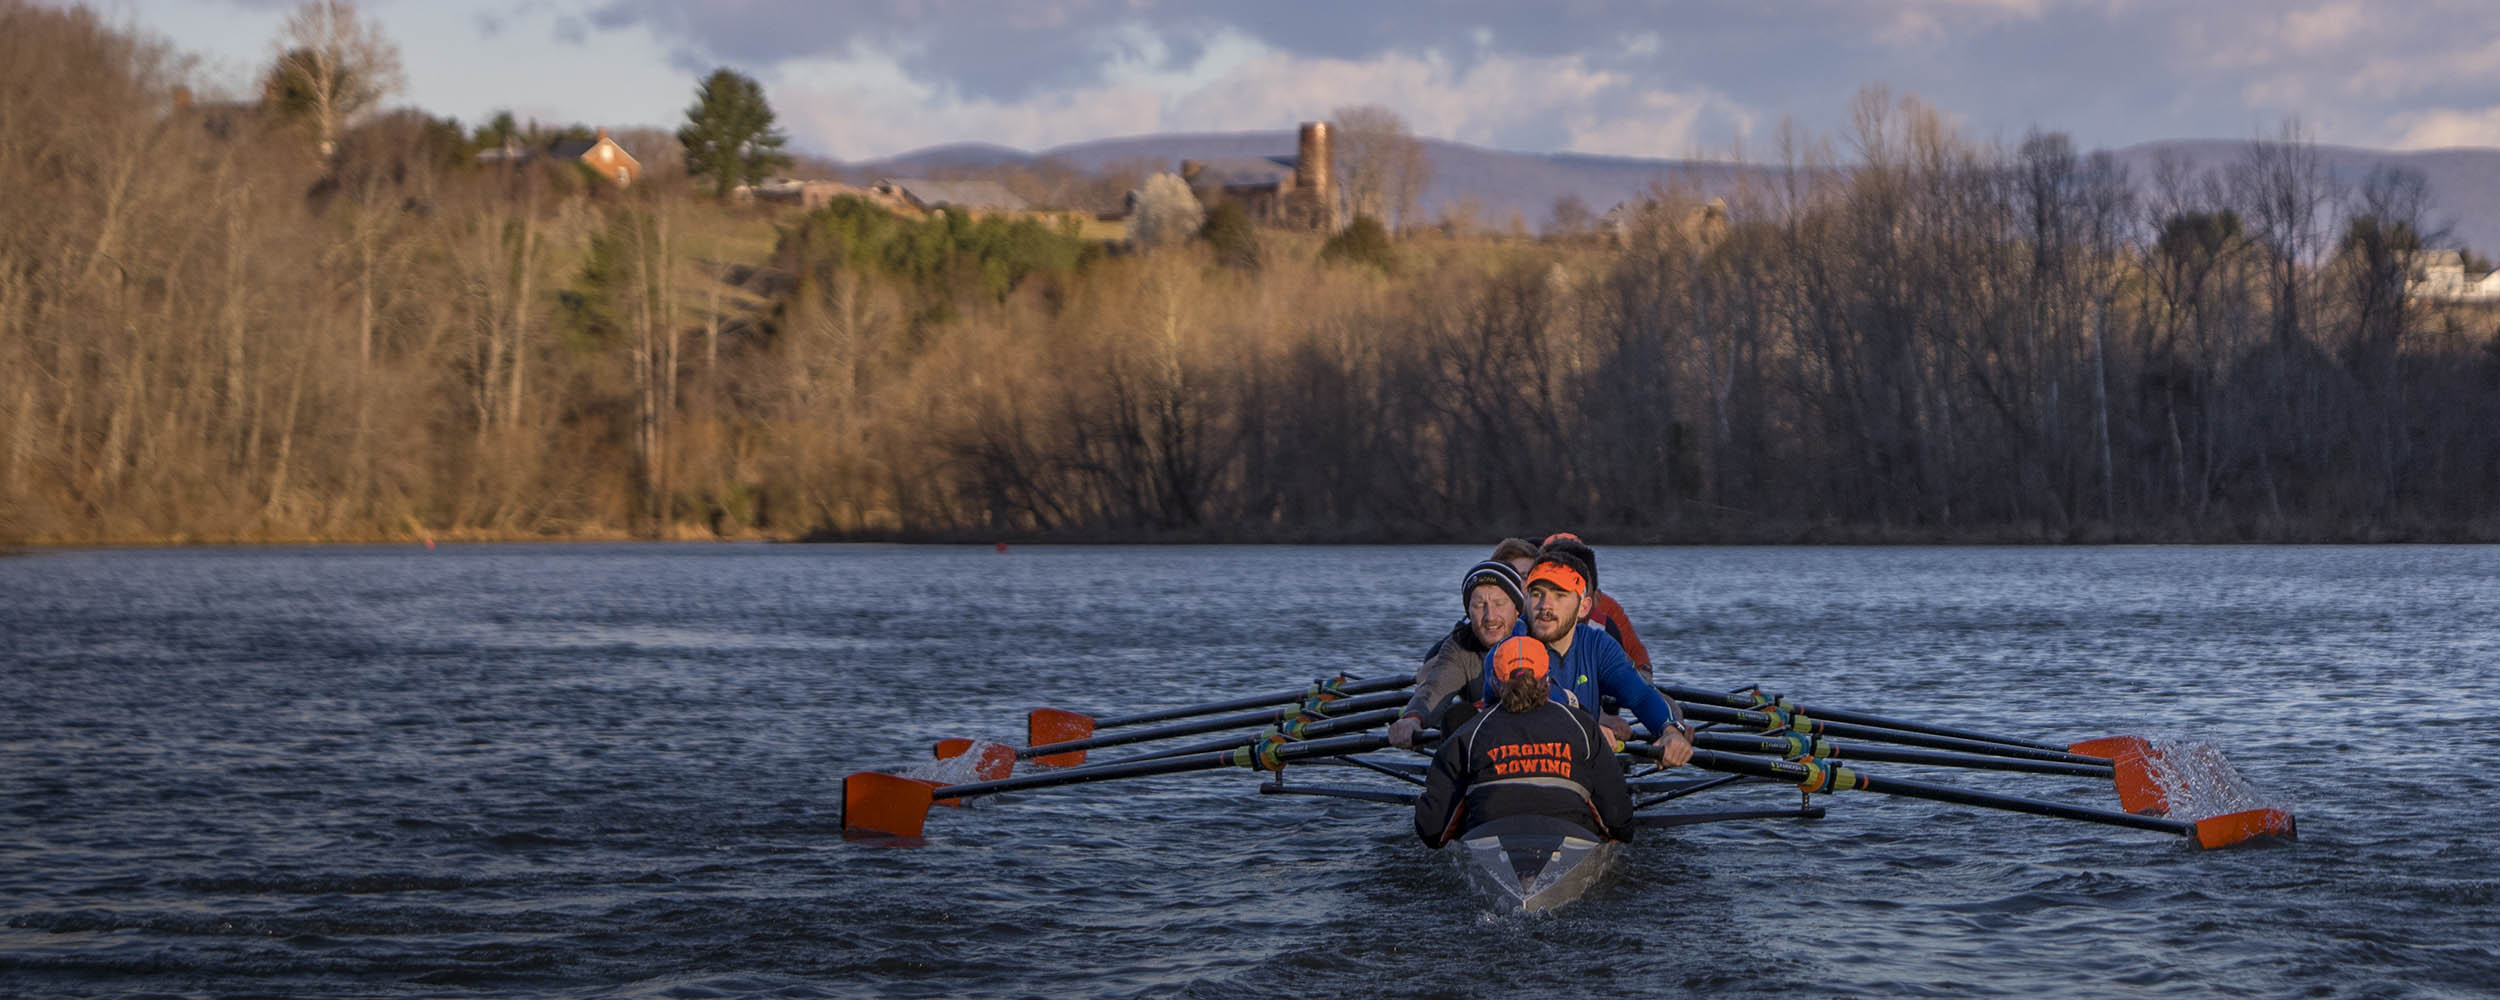 Mens Rowing team on the River